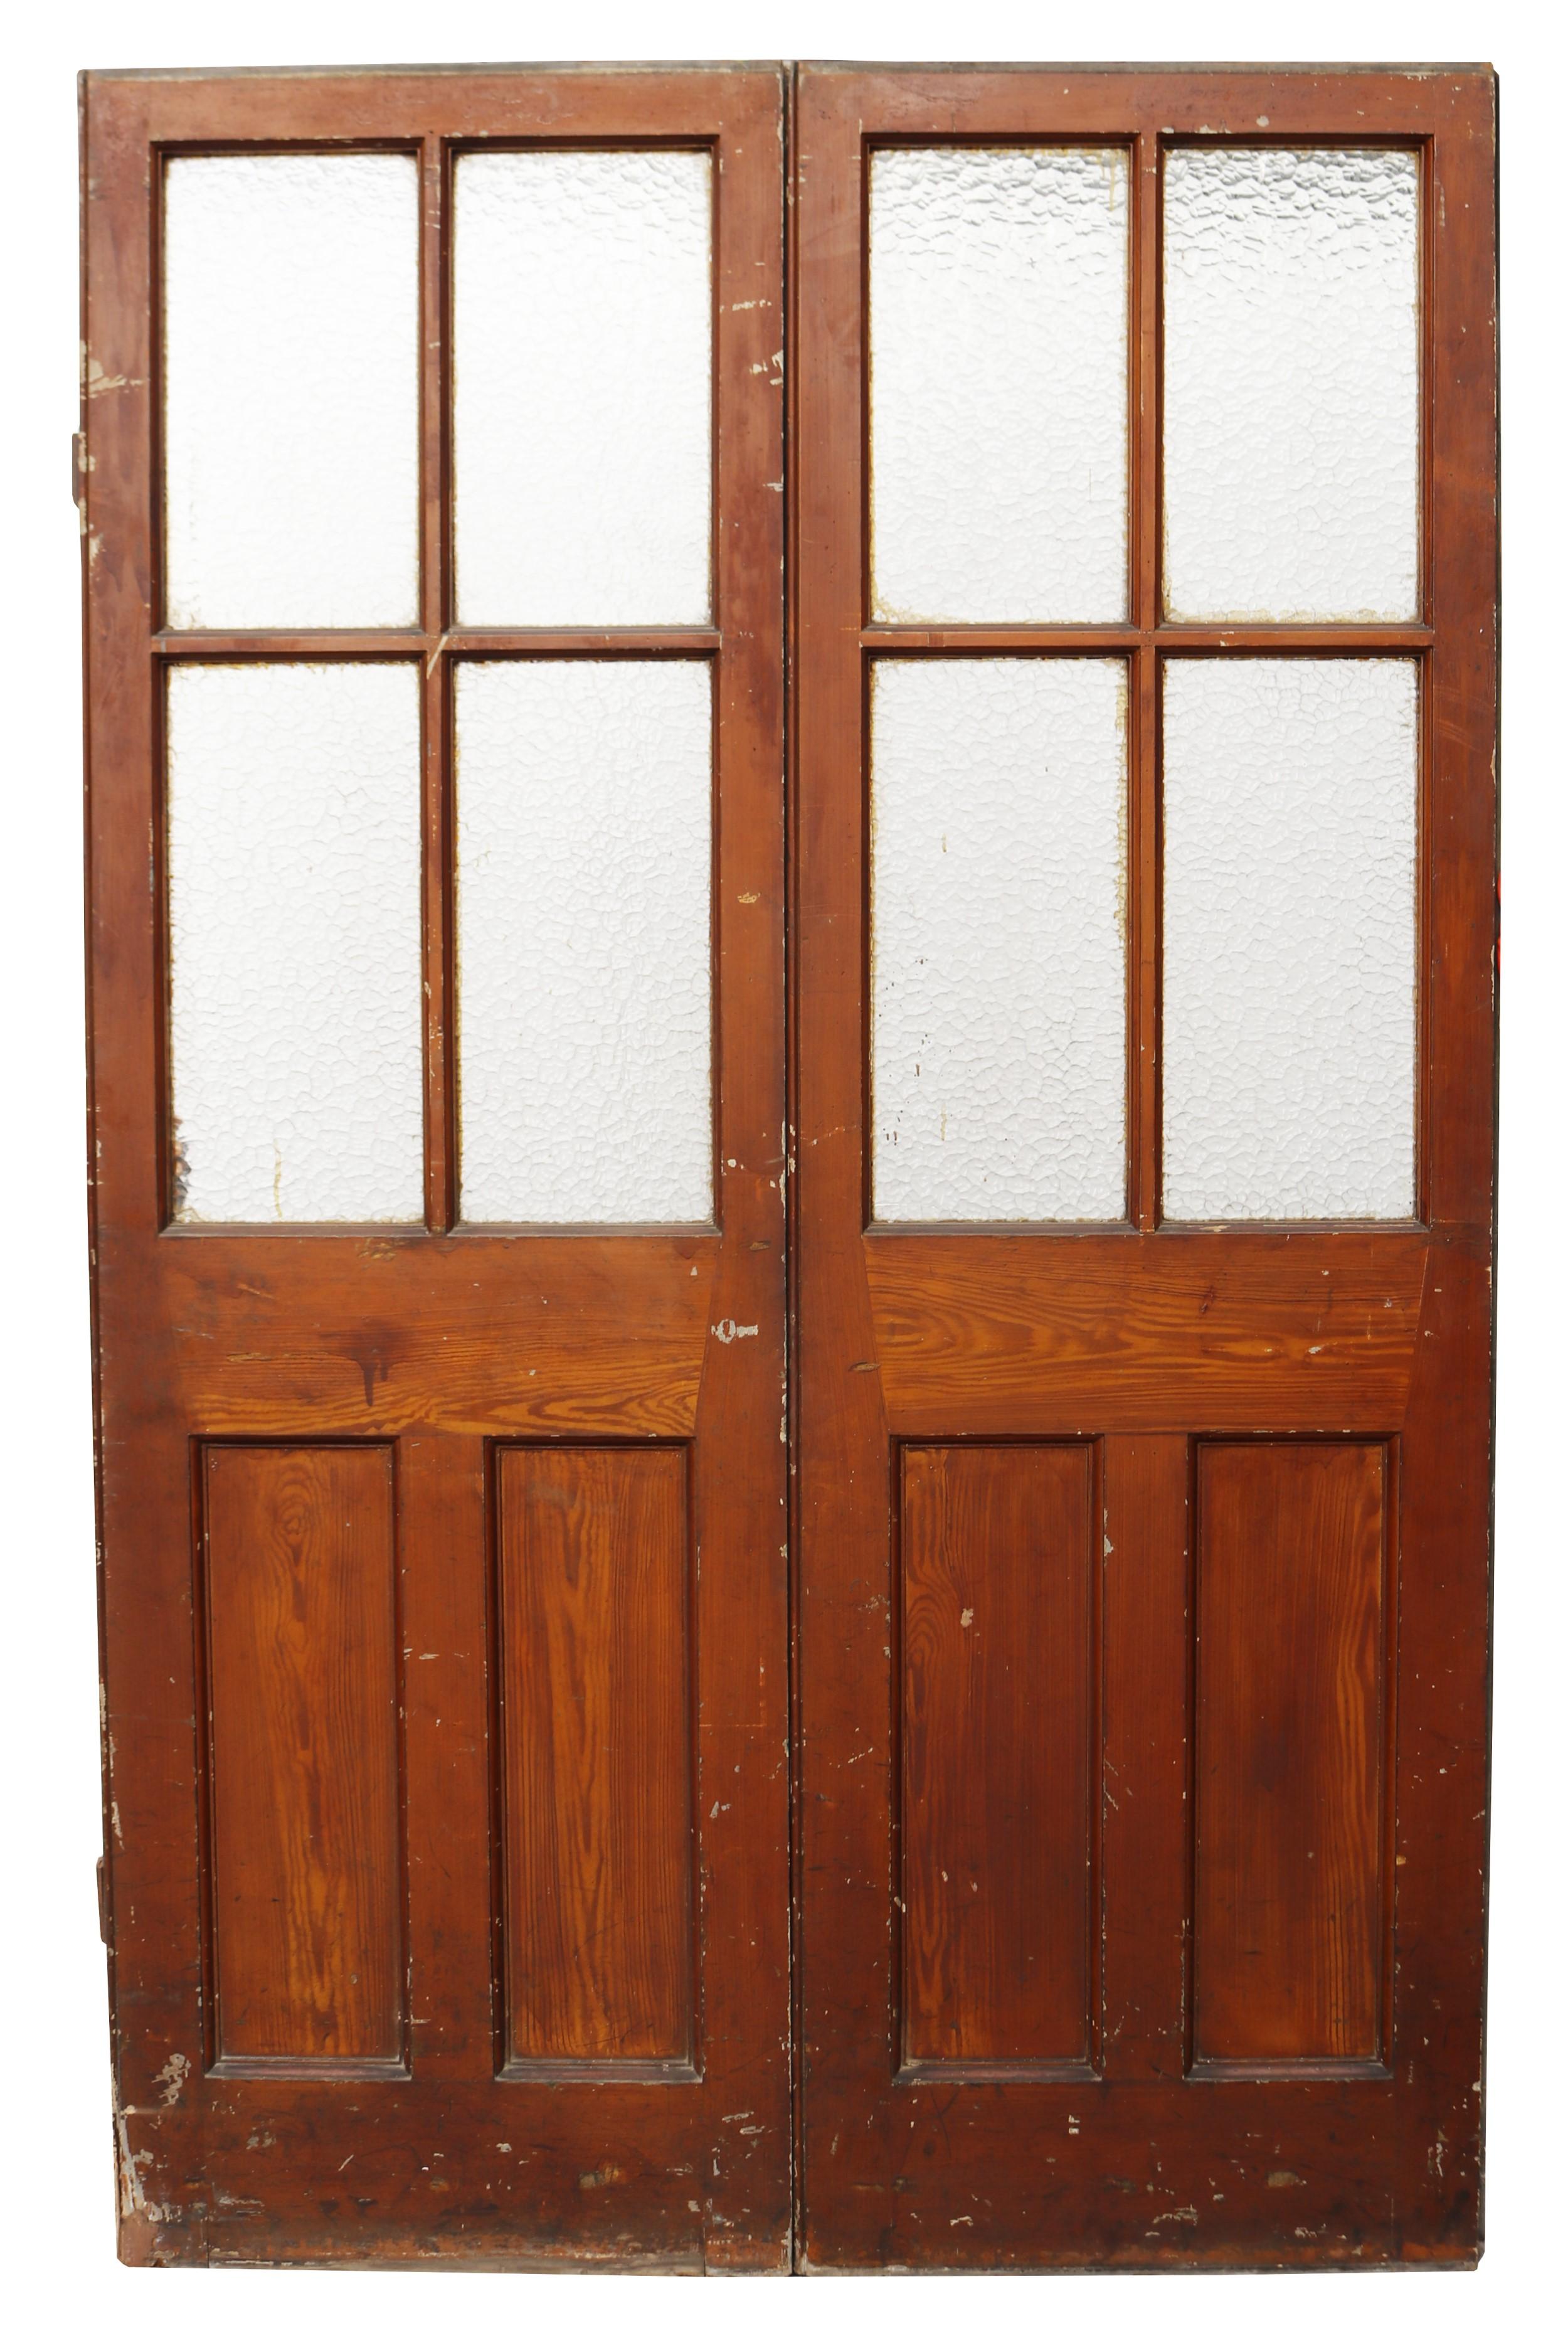 Two Reclaimed Pine Doors with Textured Glass In Fair Condition For Sale In Wormelow, Herefordshire